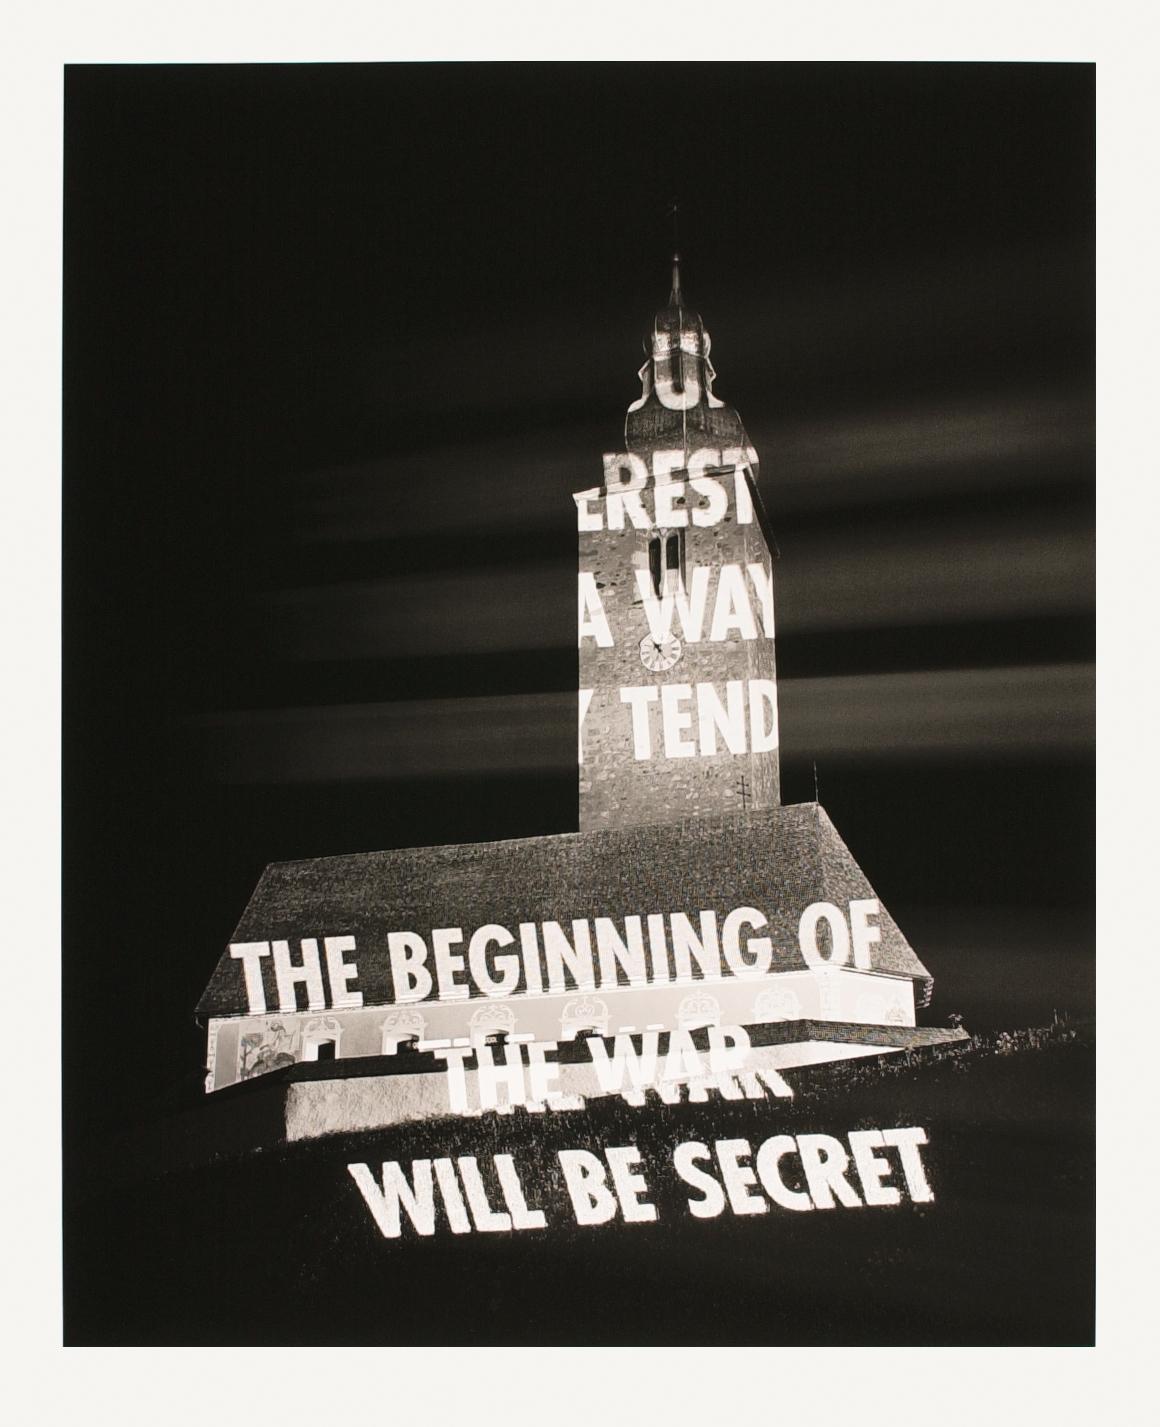 Jenny Holzer (American, b. 1950)
Truth Before Power, 2004
Medium: Suite of 4 digital pigment prints on photo rag paper
Dimensions: each 55.5 x 45 cm
Edition of 40: Hand signed and numbered on colophon
Condition: Mint